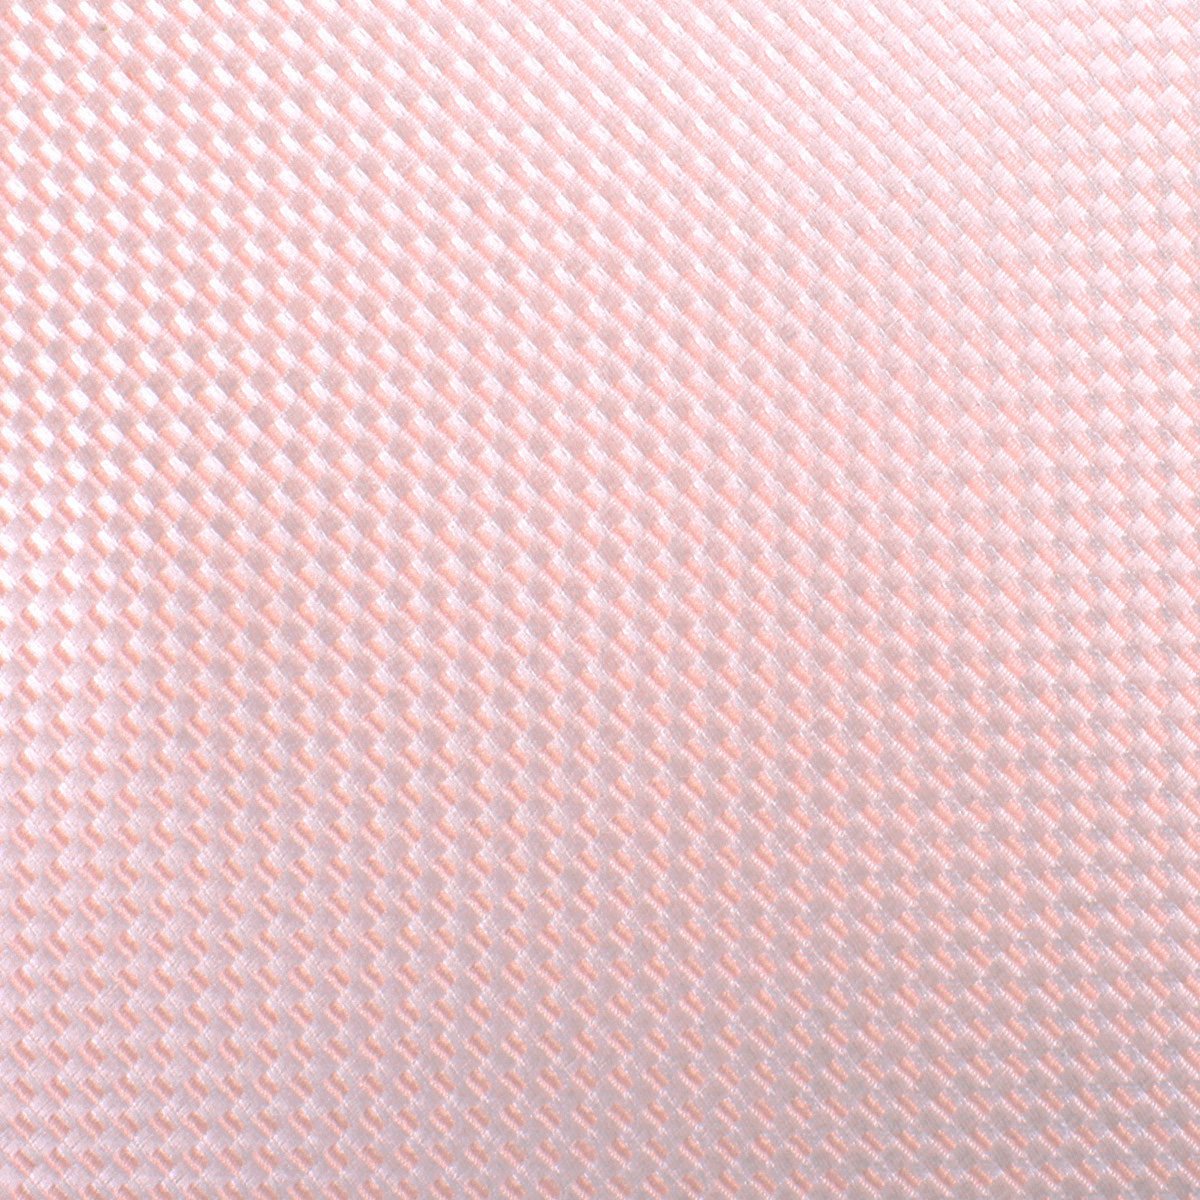 Pink Basket Weave Checkered Skinny Tie Fabric